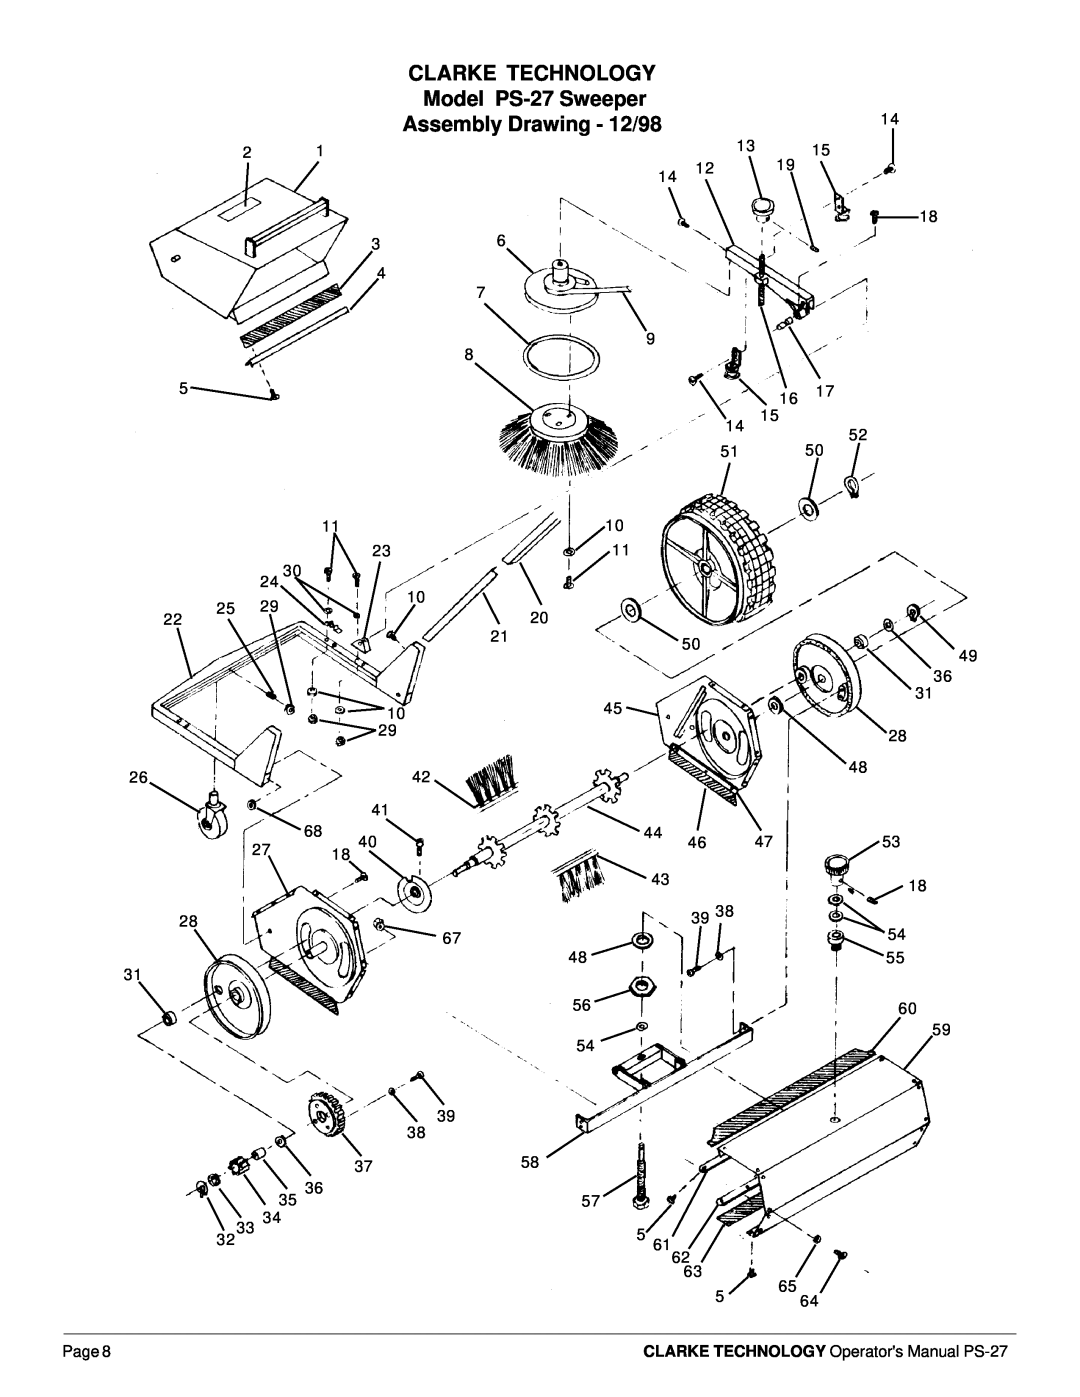 Nilfisk-ALTO Sweeper PS-27 manual Clarke Technology, Model PS-27 Sweeper, Assembly Drawing - 12/98, 3233, 6162 